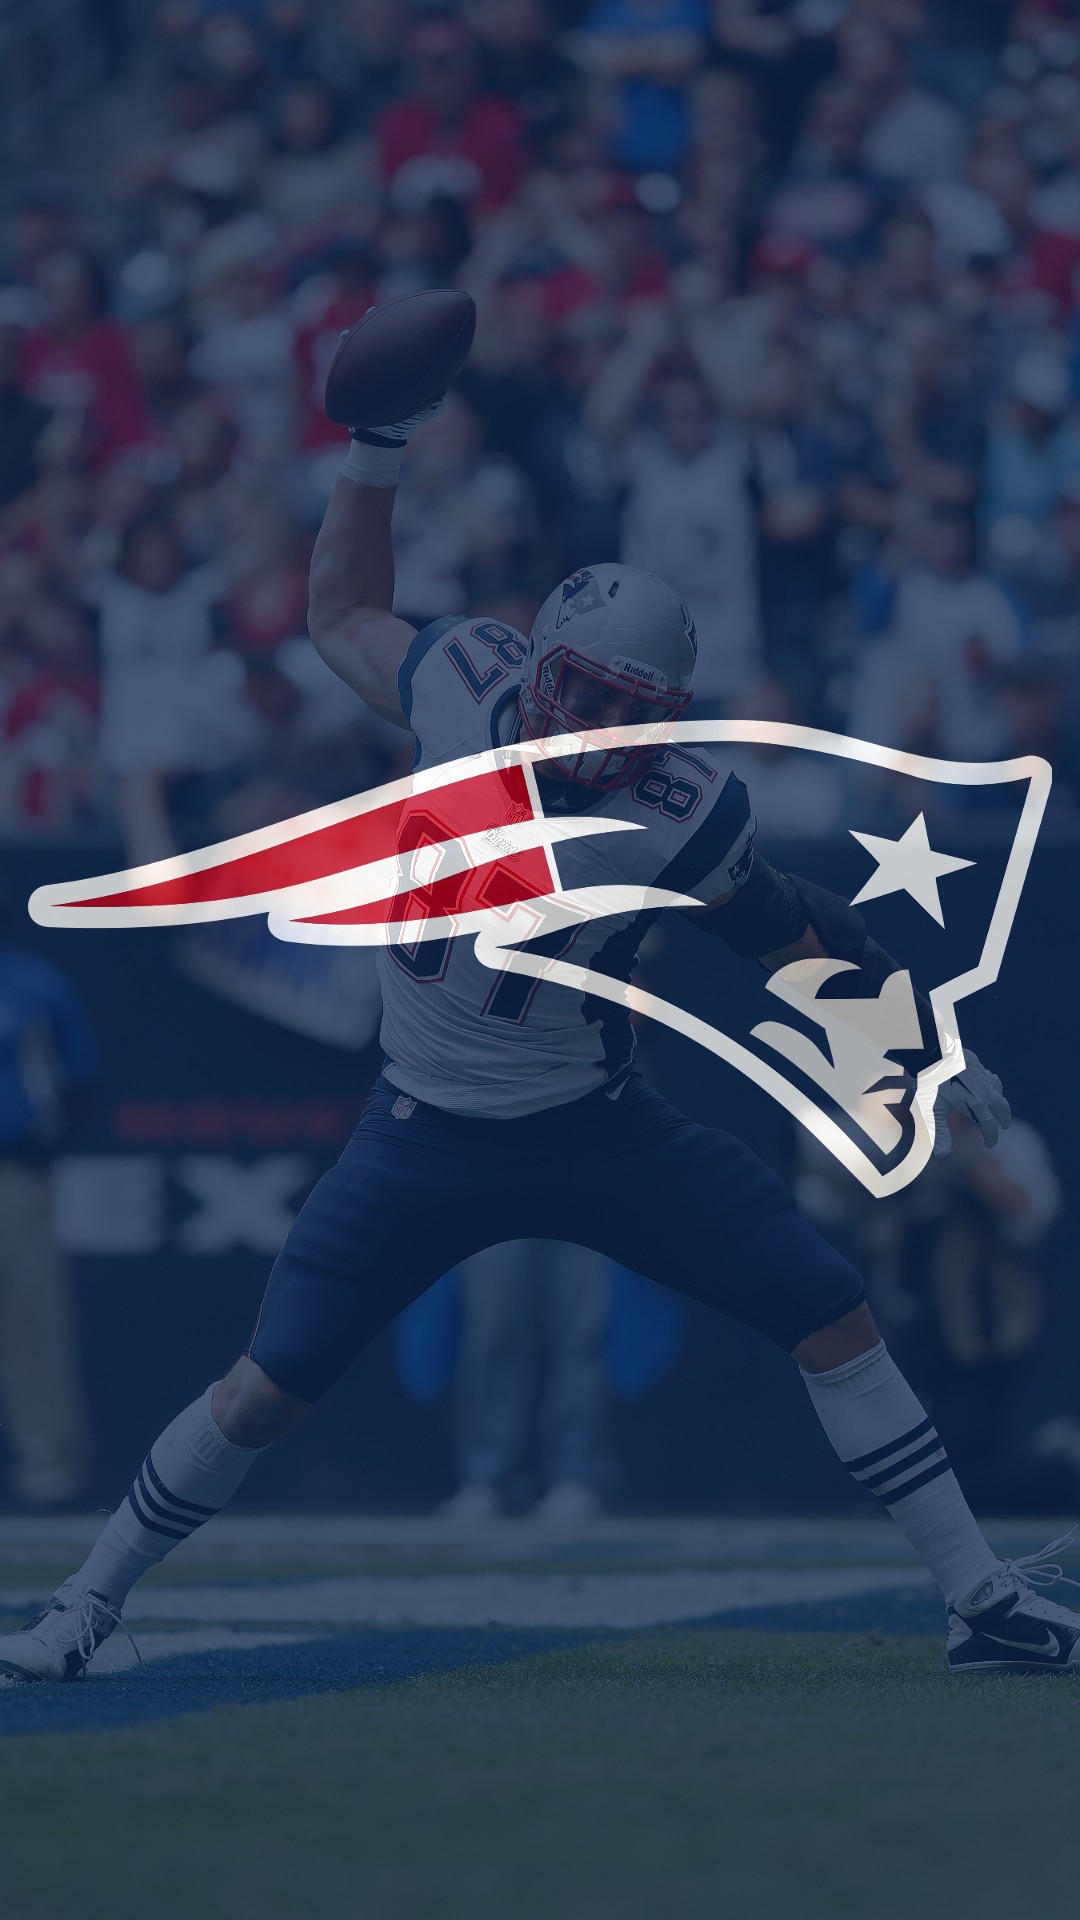 New England Patriots iPhone 6 Wallpaper with high-resolution 1080x1920 pixel. Download and set as wallpaper for Apple iPhone X, XS Max, XR, 8, 7, 6, SE, iPad, Android